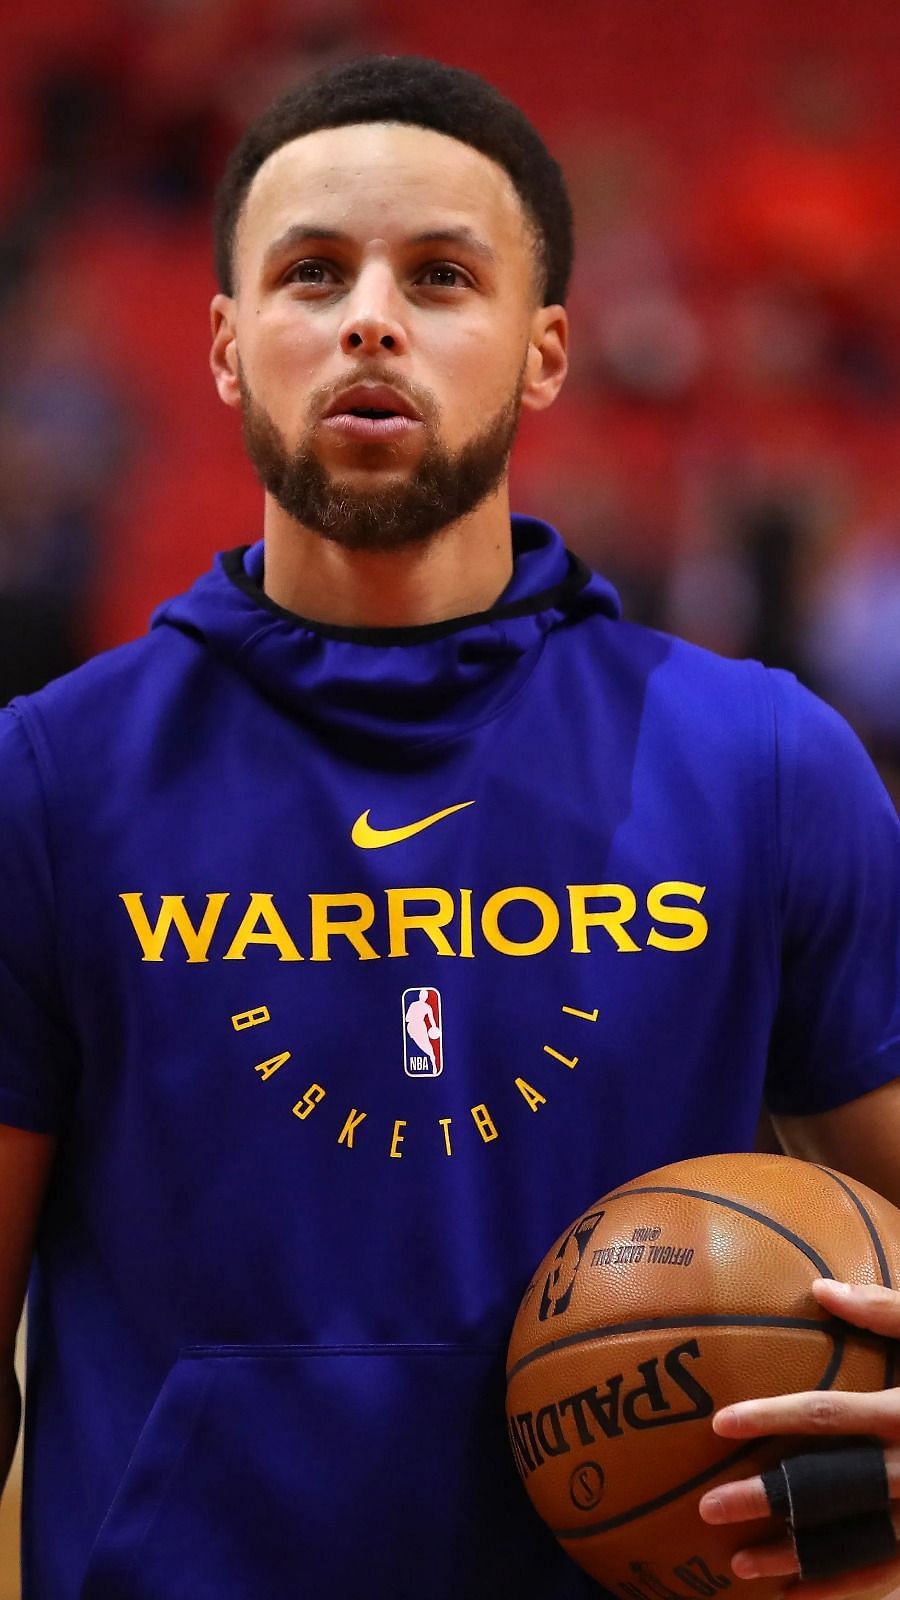 Golden State Warriors vs New Orleans Pelicans game on May 3rd, 2021 to have a superhero-themed telecast, thanks to Marvel and ESPN 2020-21 NBA Season